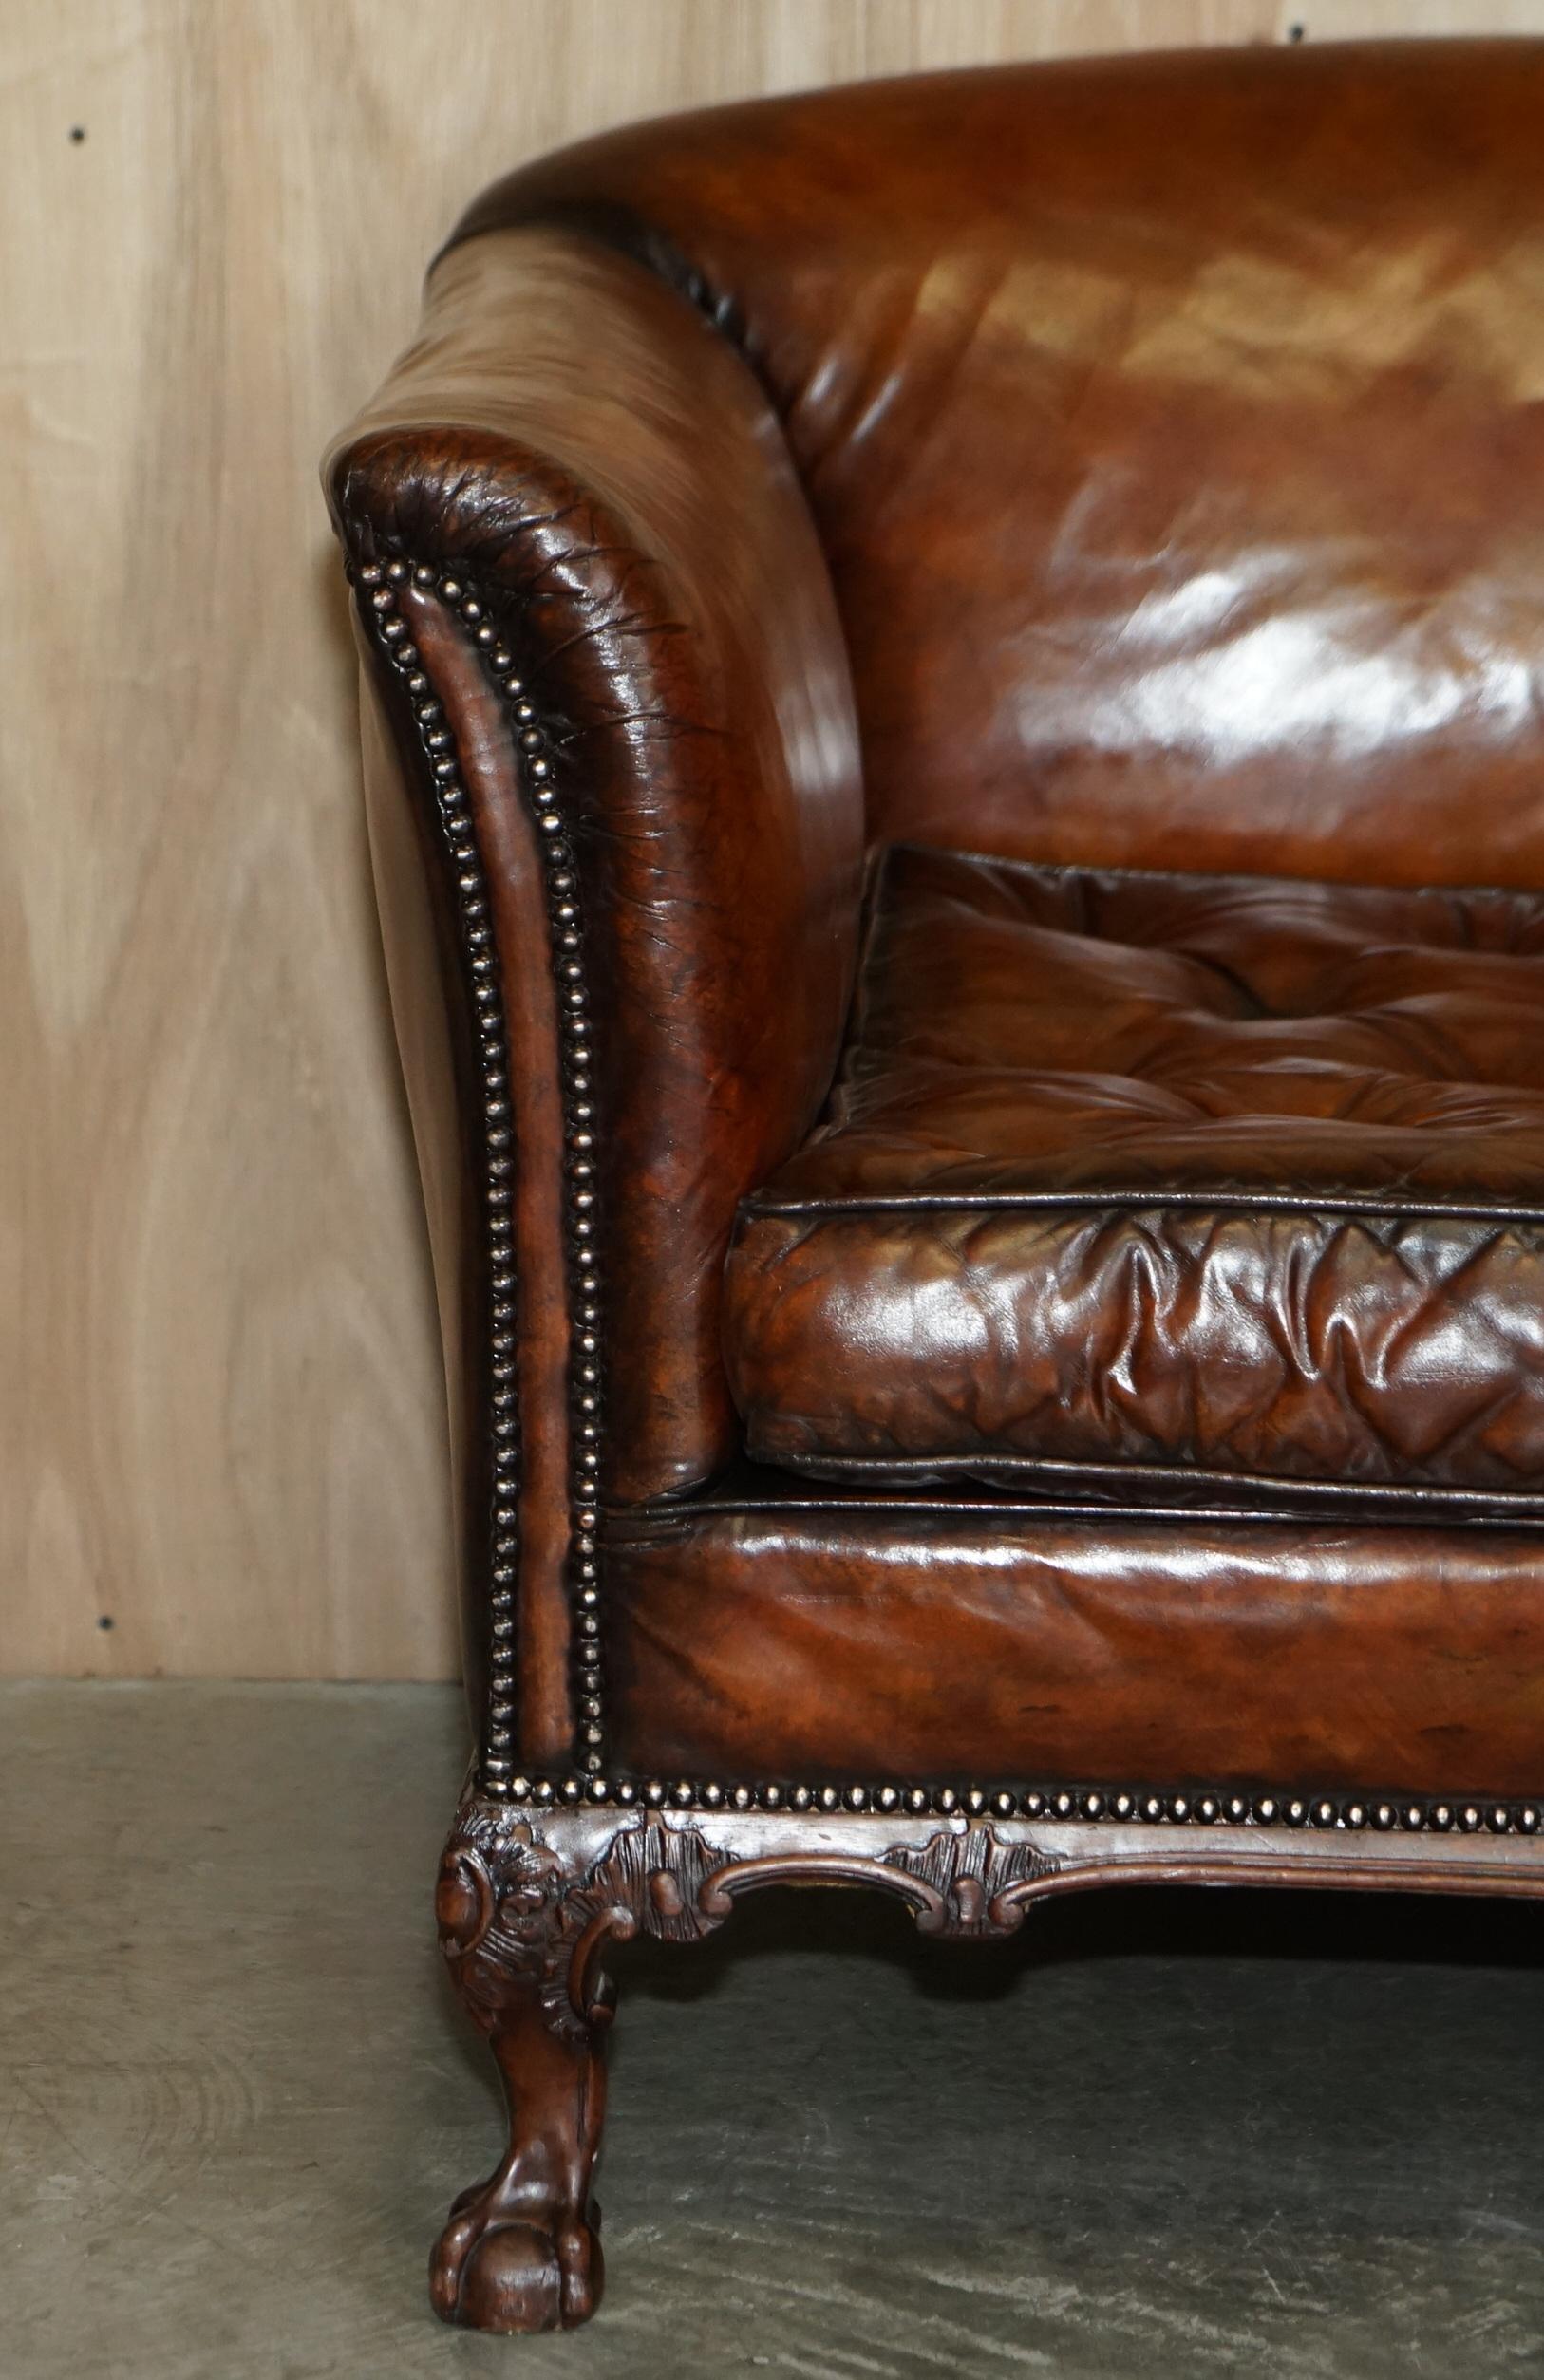 Chesterfield HUGE RESTORED ANTIQUE VICTORIAN HOWARD & SON'S BROWN LEATHER CHESTERFIELD SOFA 